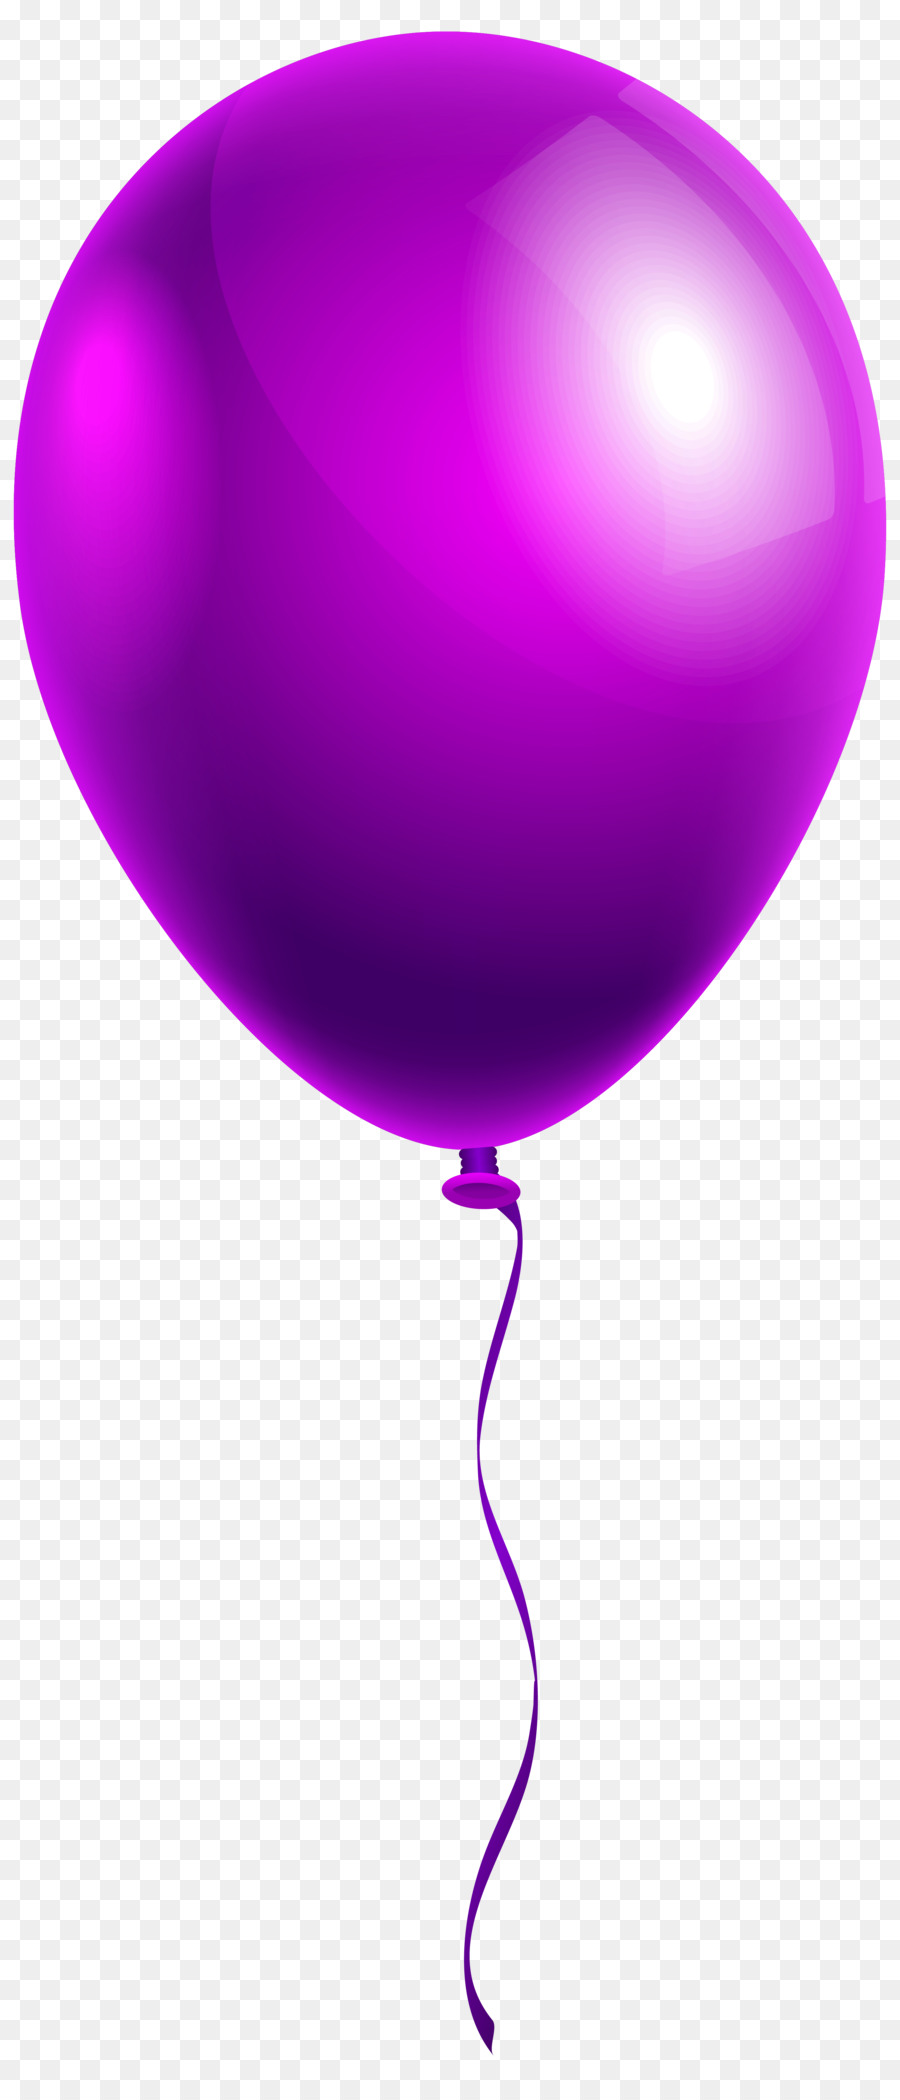 Balloon Clip art - Purple Balloons Cliparts png download - 2743*6361 - Free Transparent Balloon png Download.